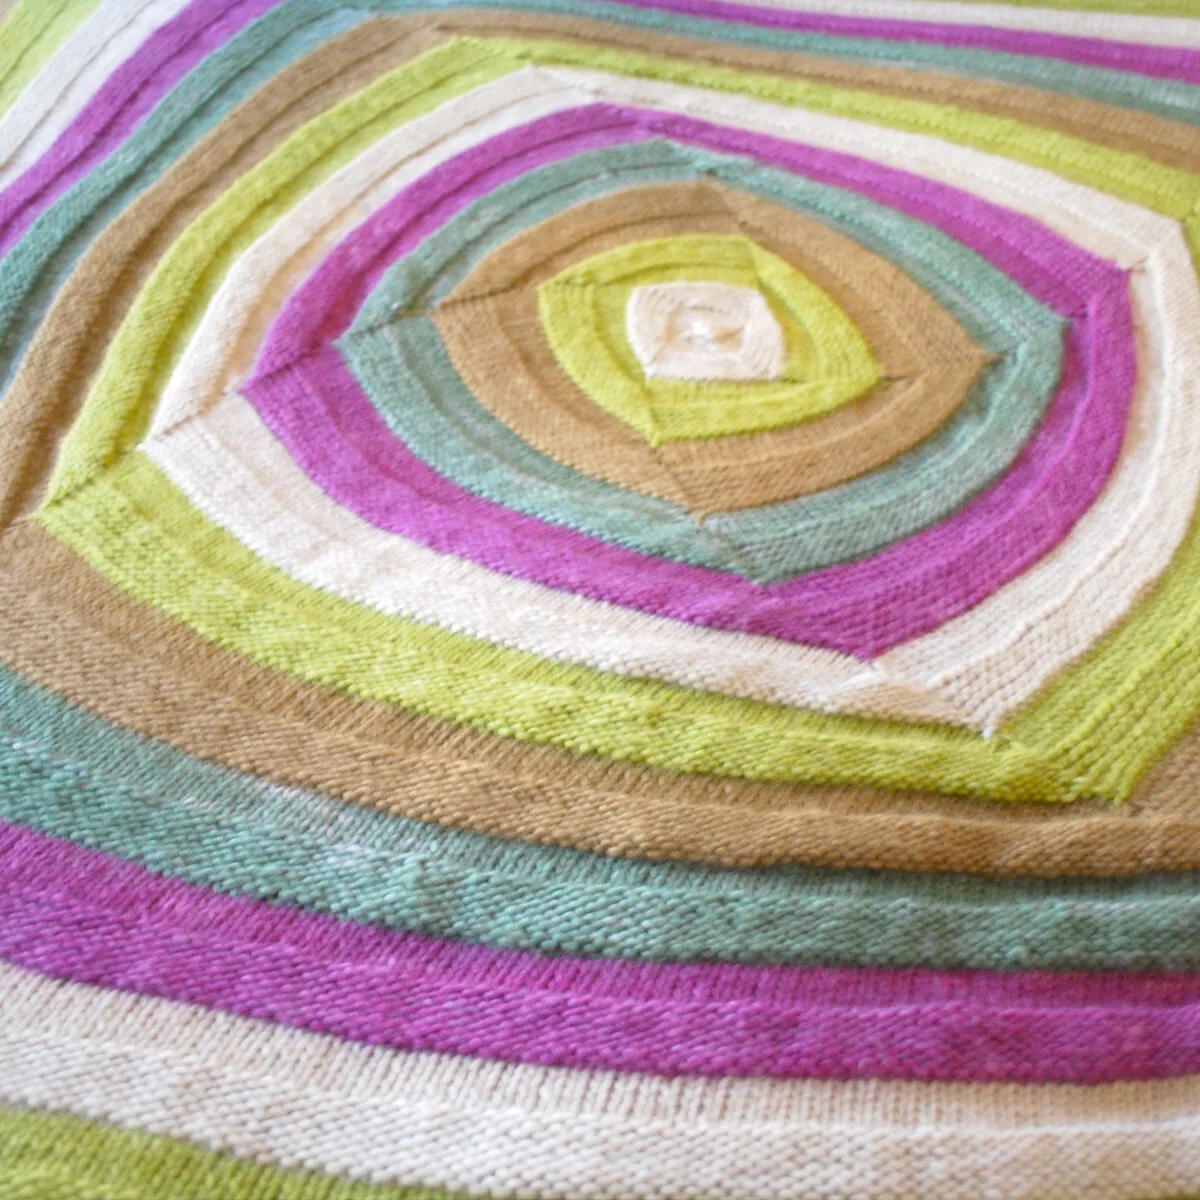 Swirly Square Knit Stitch Pattern texture in multiple yarn colors.